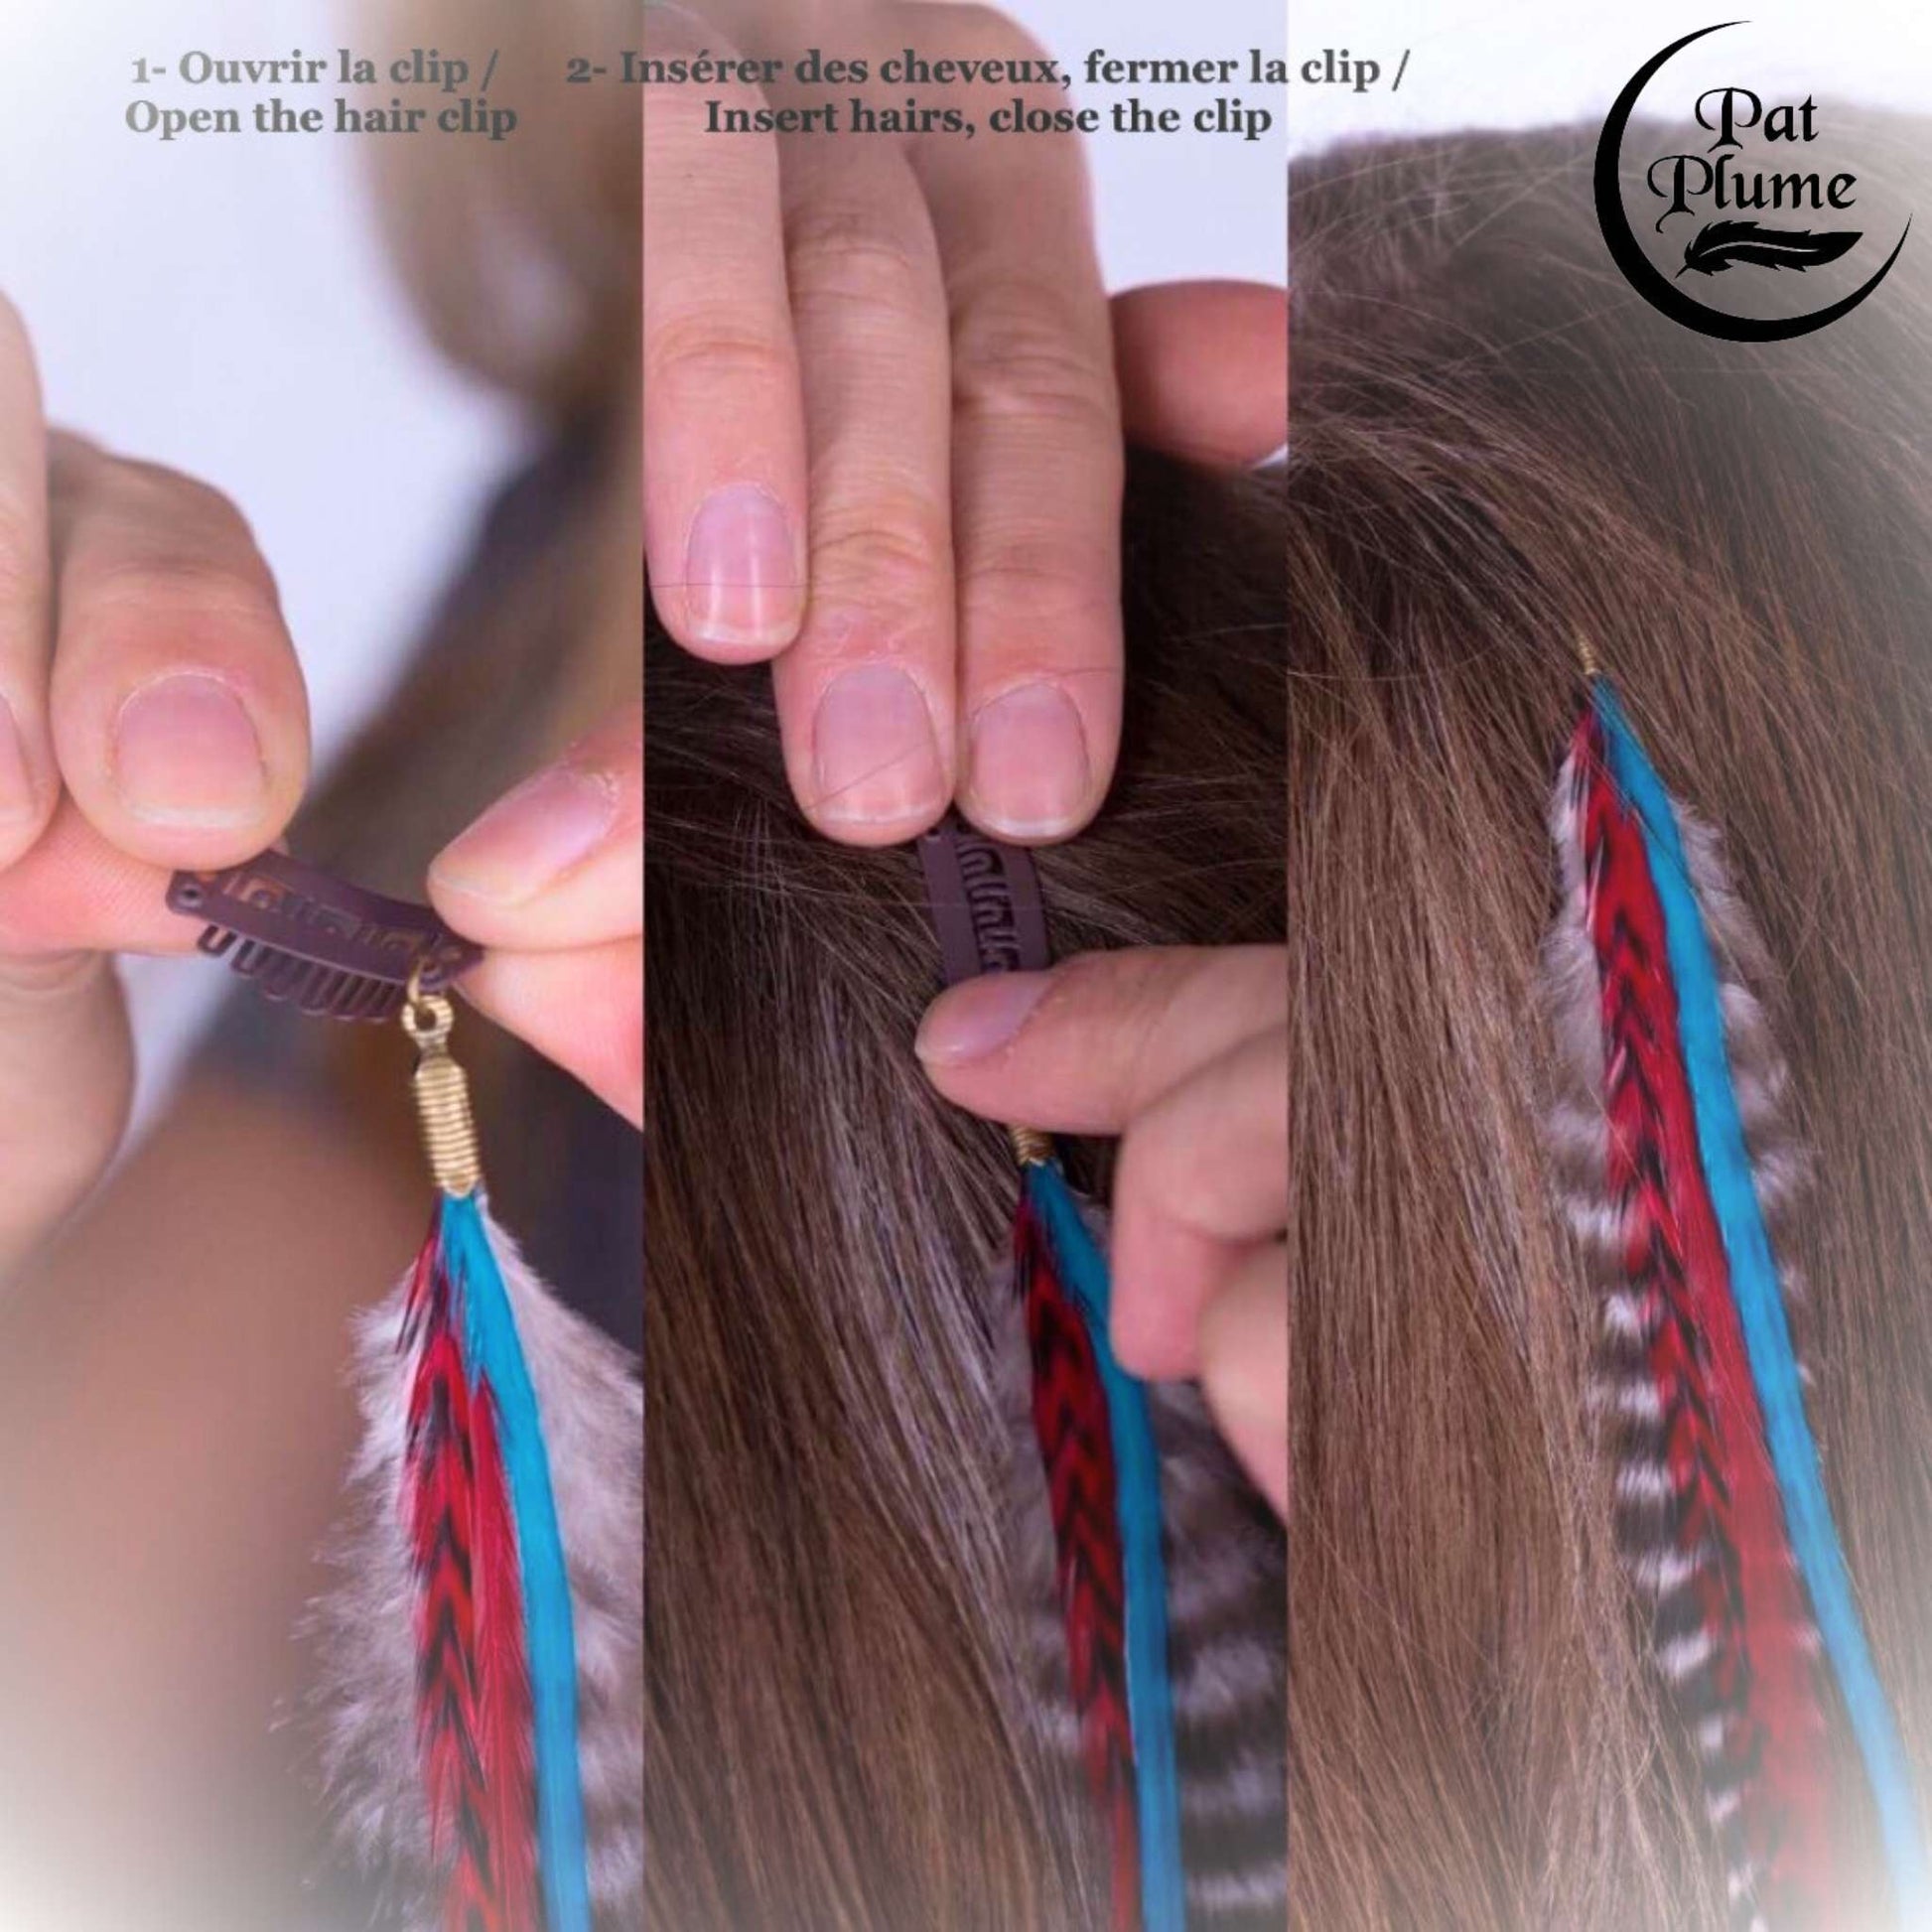 Feather extensions - Visual instructions - Hairclips